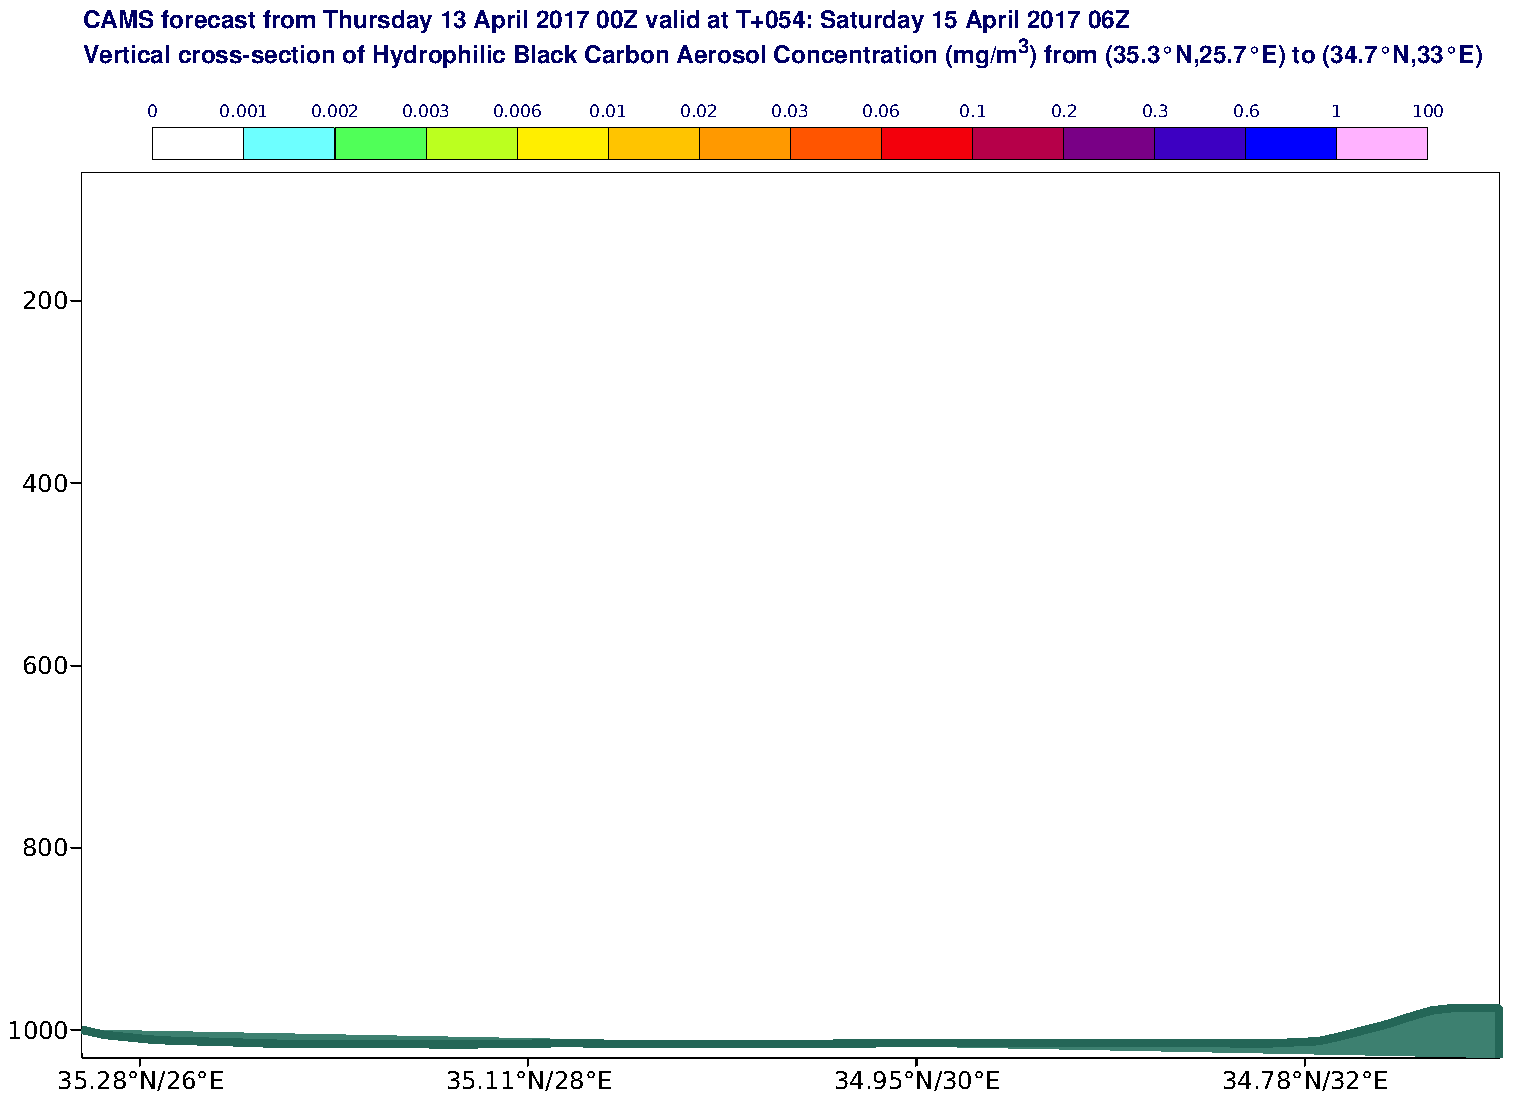 Vertical cross-section of Hydrophilic Black Carbon Aerosol Concentration (mg/m3) valid at T54 - 2017-04-15 06:00